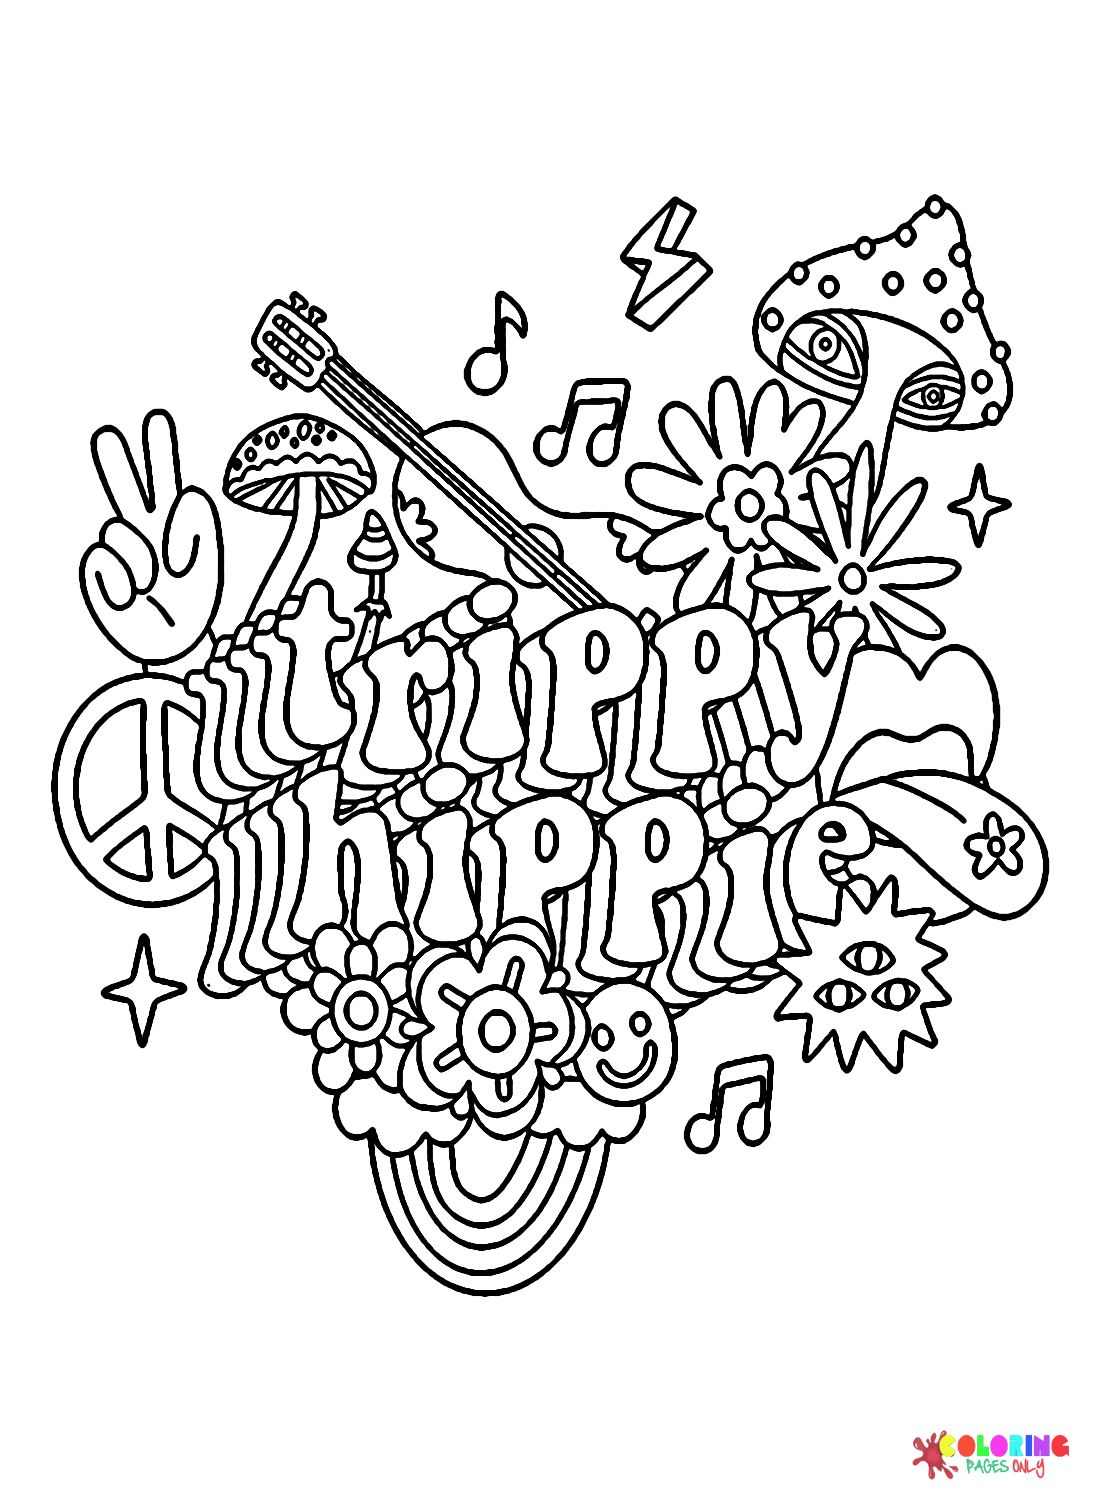 Hippie Coloring Pages - Free Printable Coloring Pages